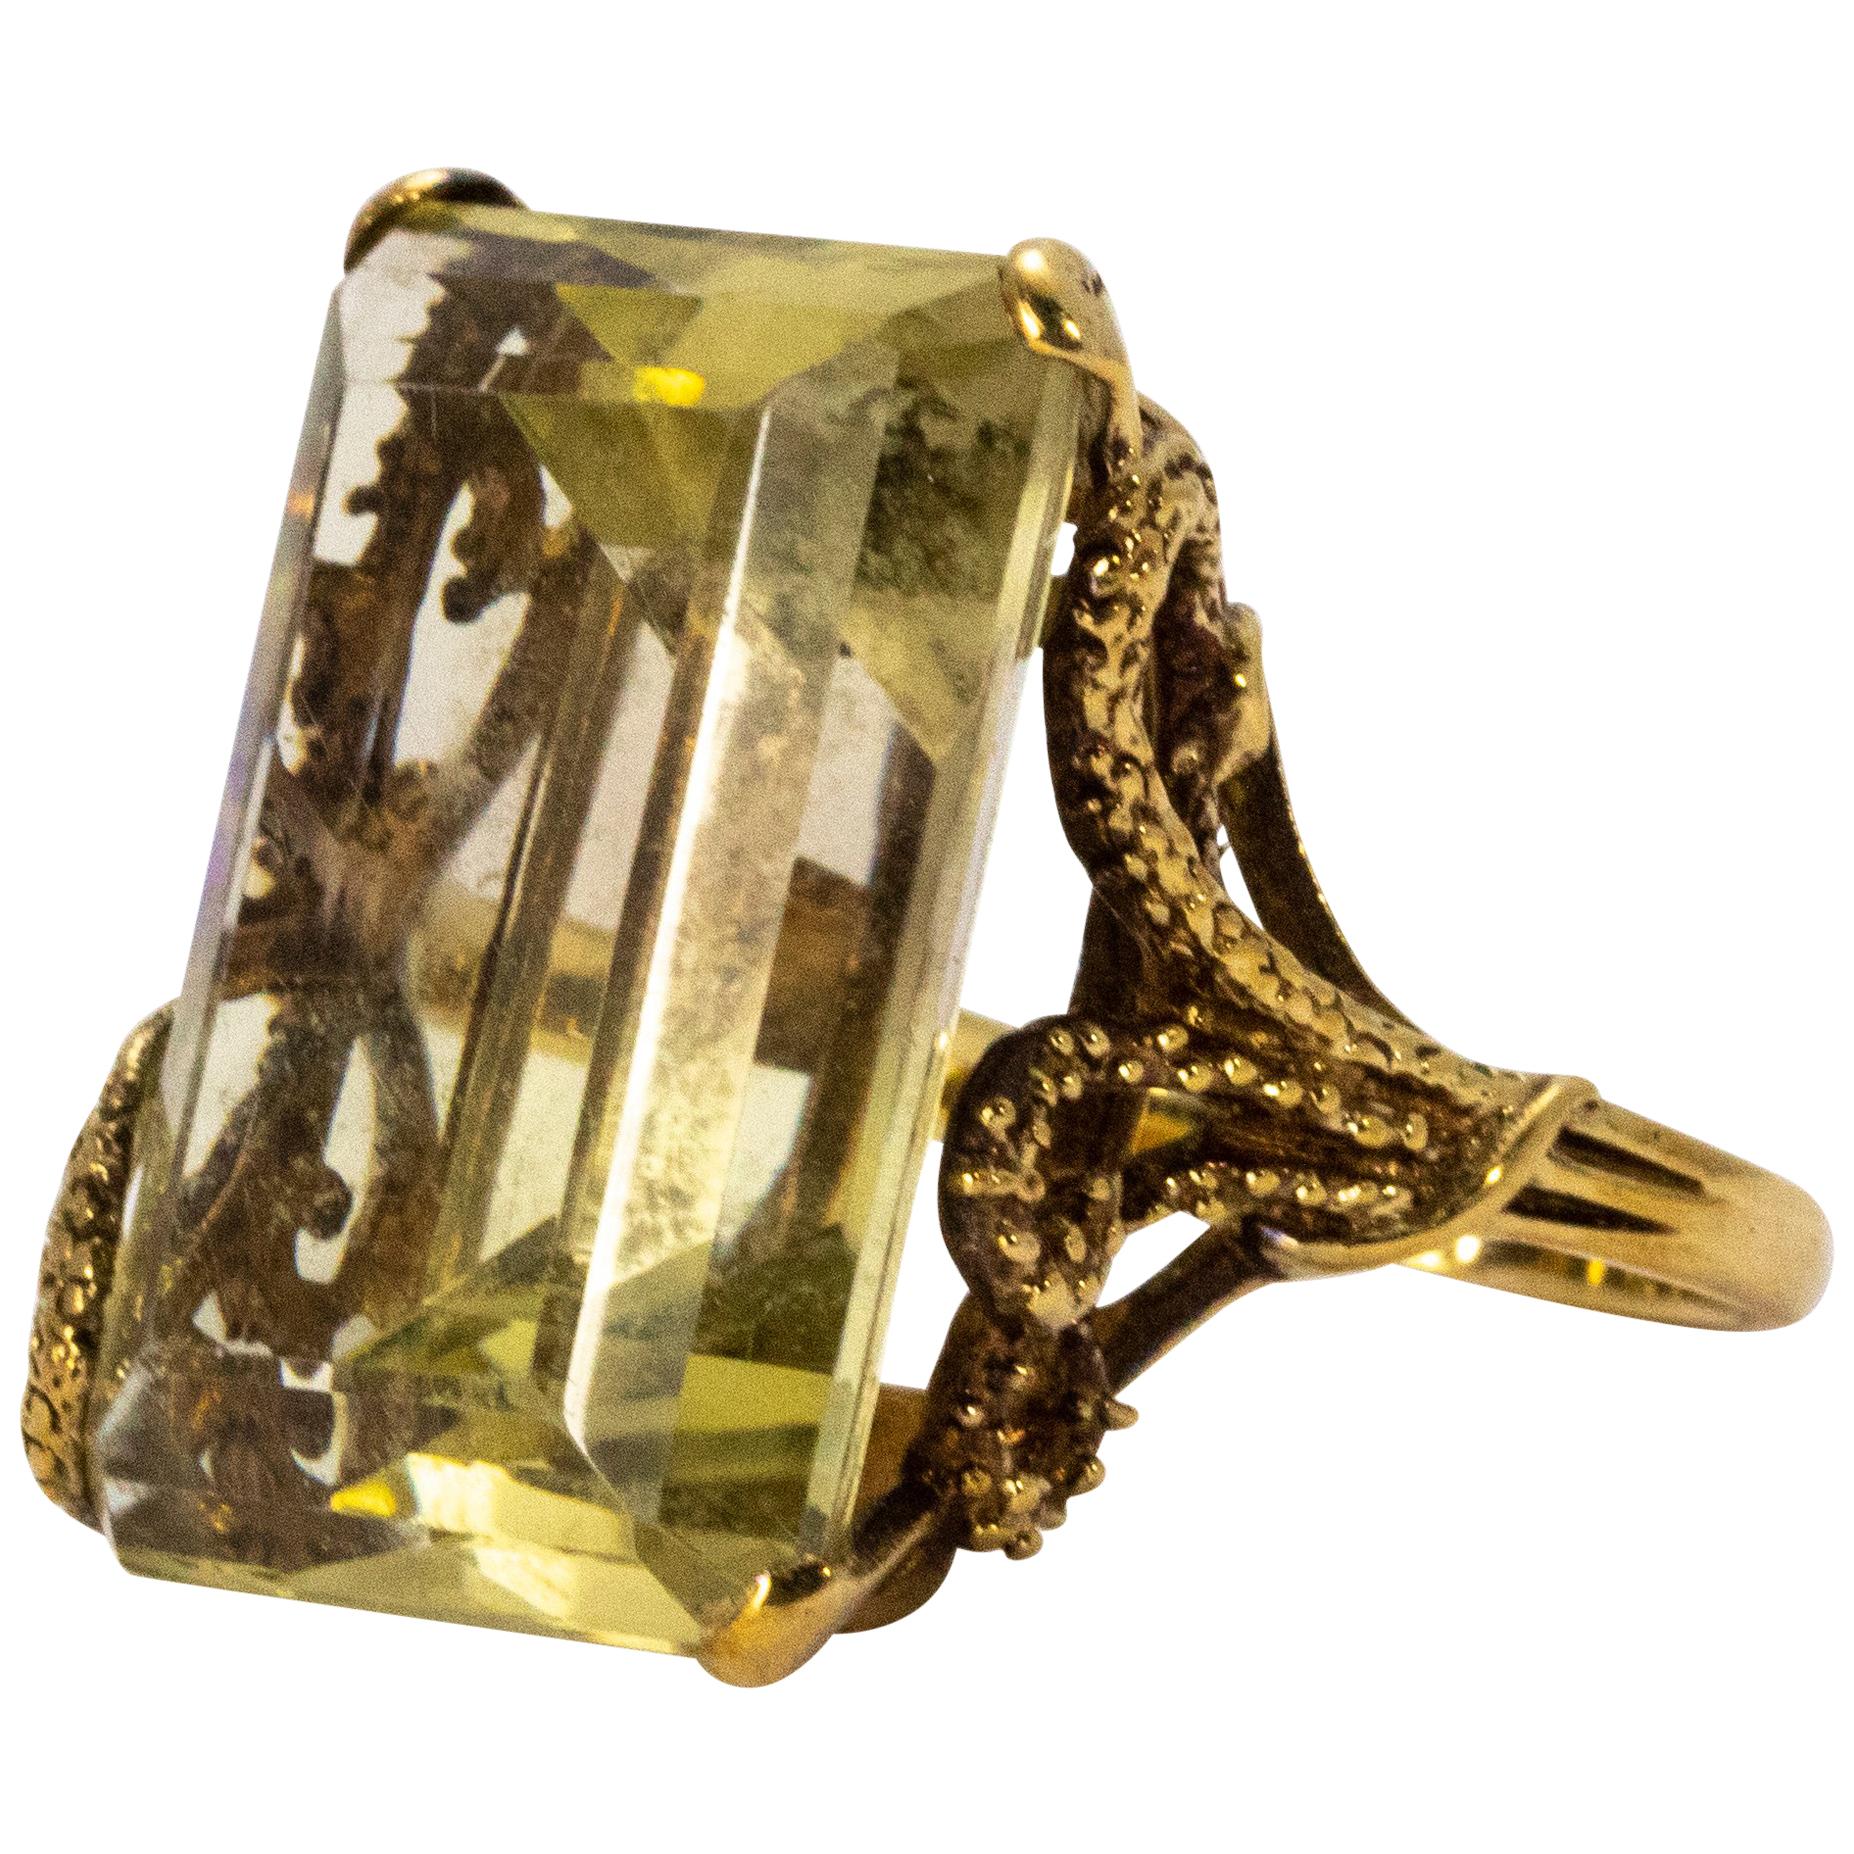 Large 1940s Gold Citrine Dress Ring with Ornate Gold Shank